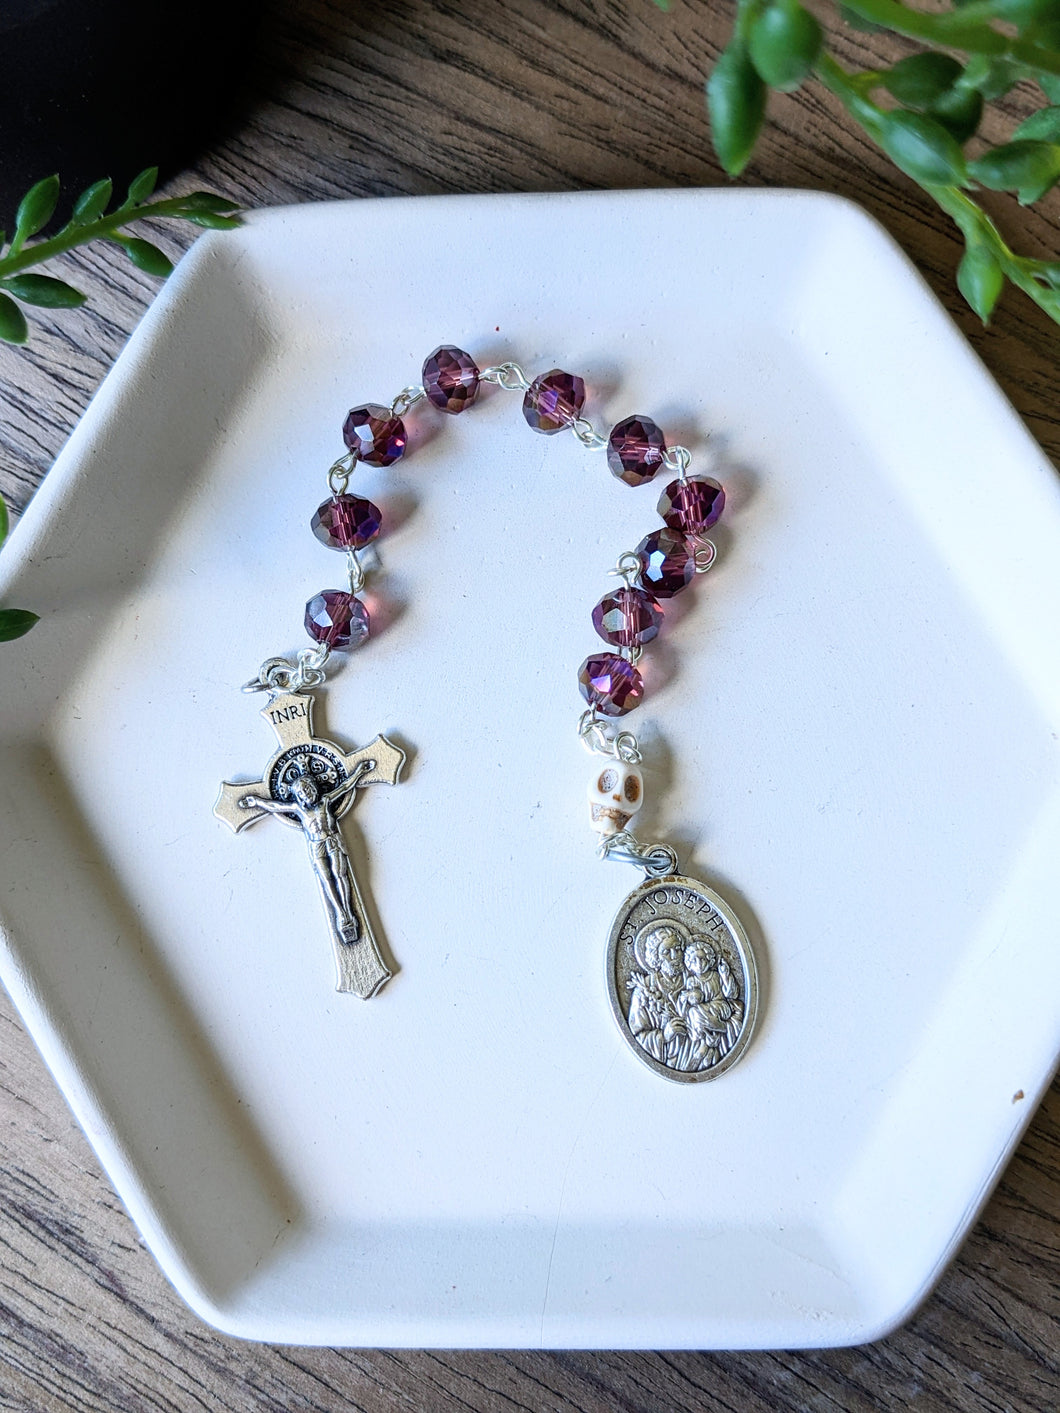 A purple glass bead pocket rosary sits on a white tray with a wooden background and a plant hangs from the top of the frame. 